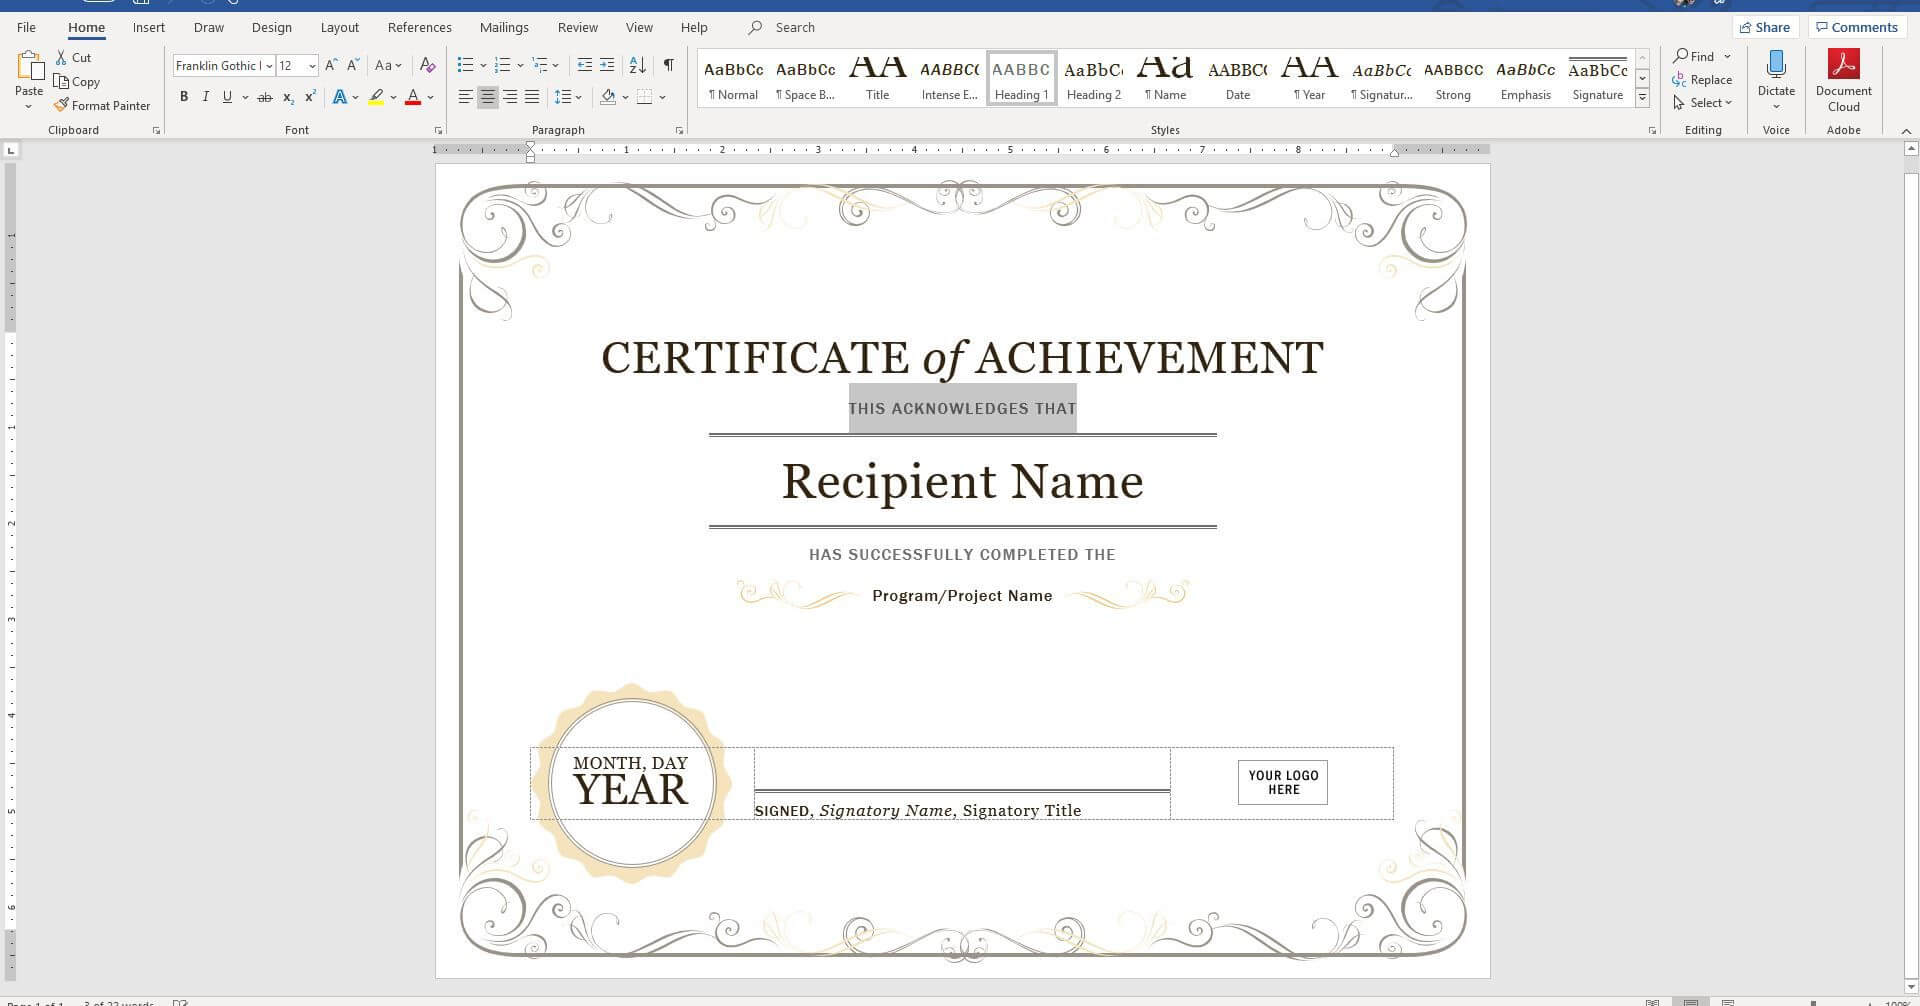 012 Microsoft Word Certificate Template Ideas Free Awesome Pertaining To Free Certificate Templates For Word 2007